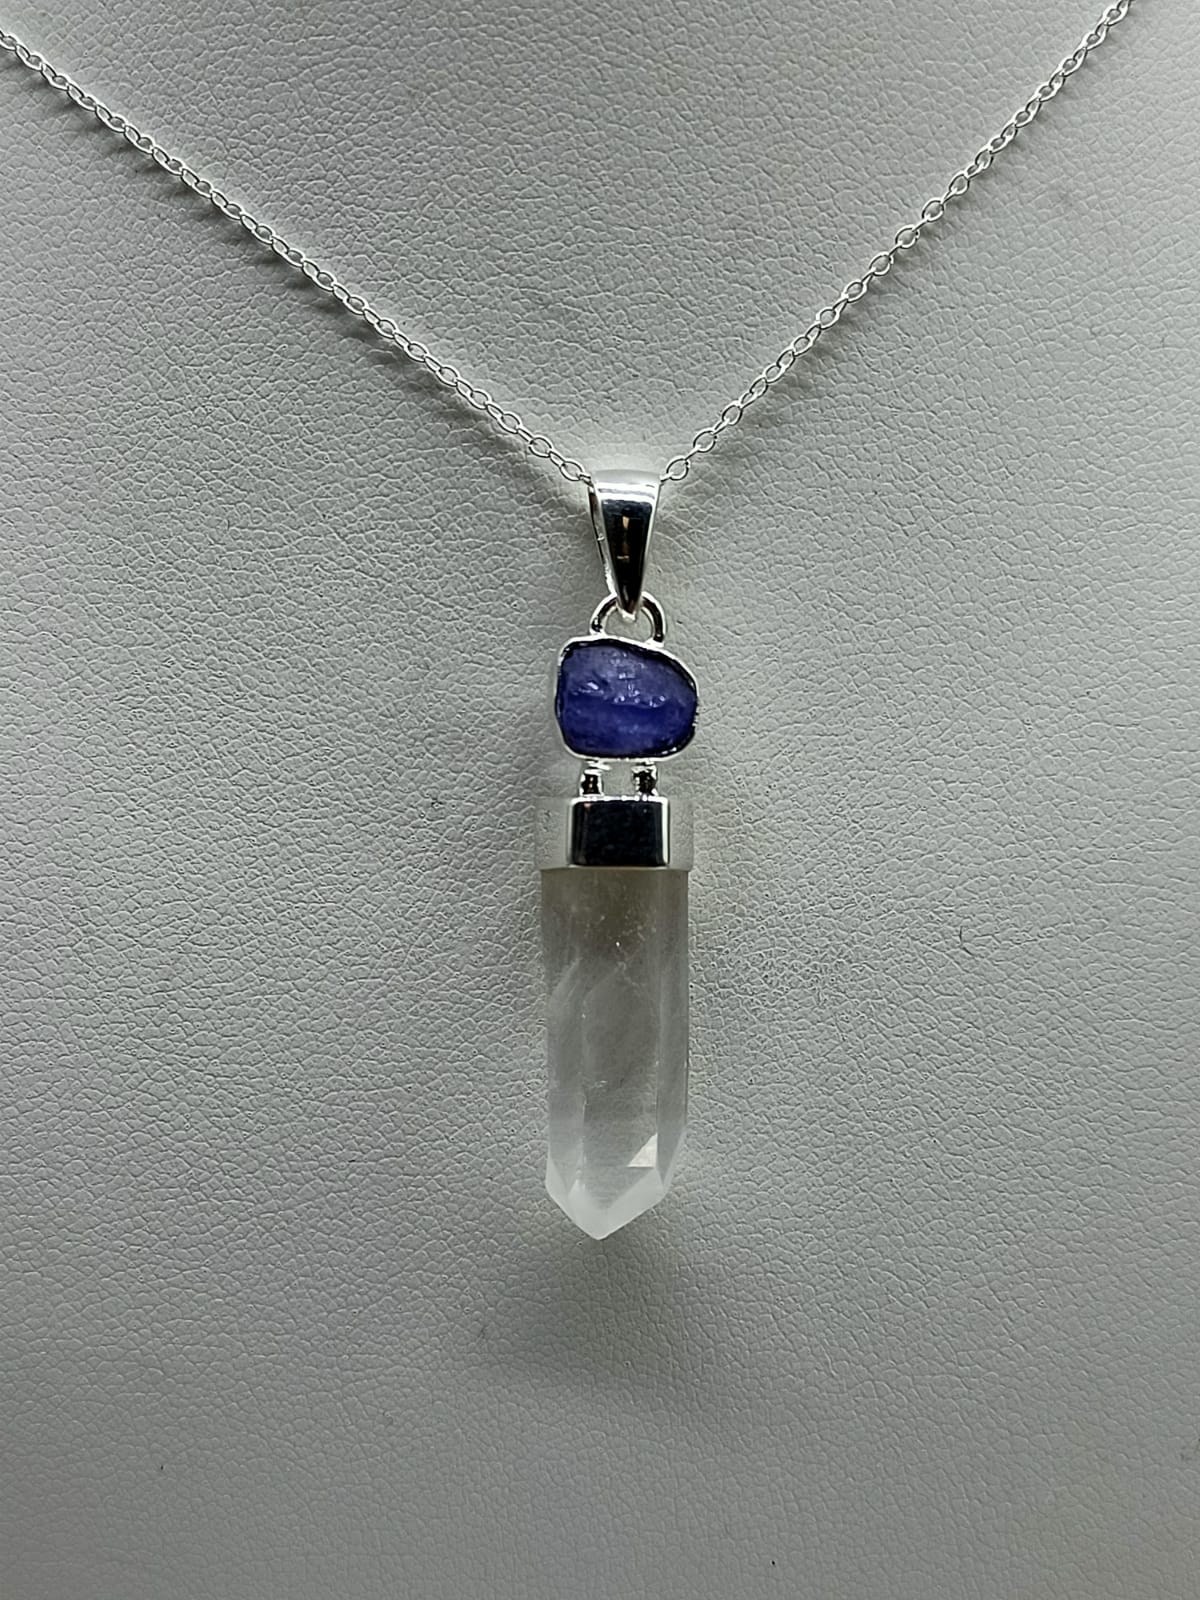 Lemurian and Tanzanite in 925 Sterling Silver Pendant 34x9mm (Chain Included)

